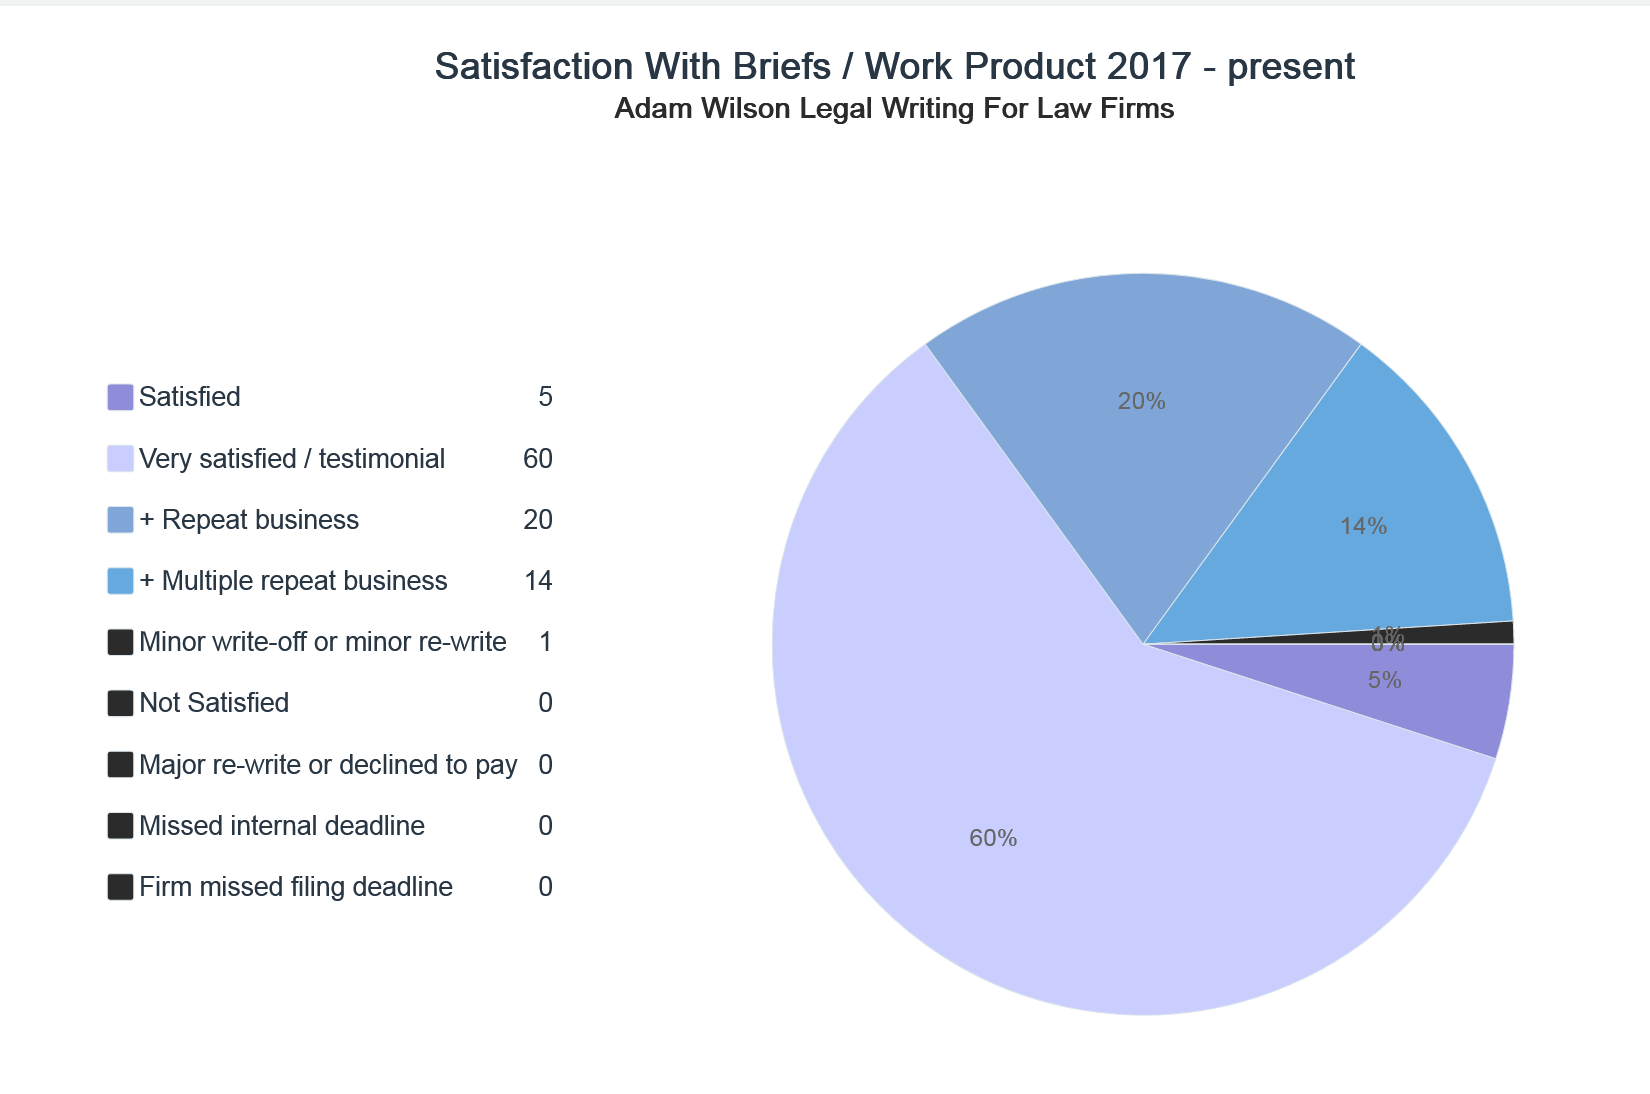 ADW Pie Chart Satisfaction Briefs Work Product Legal Writing Law Firms Adam Wilson.png